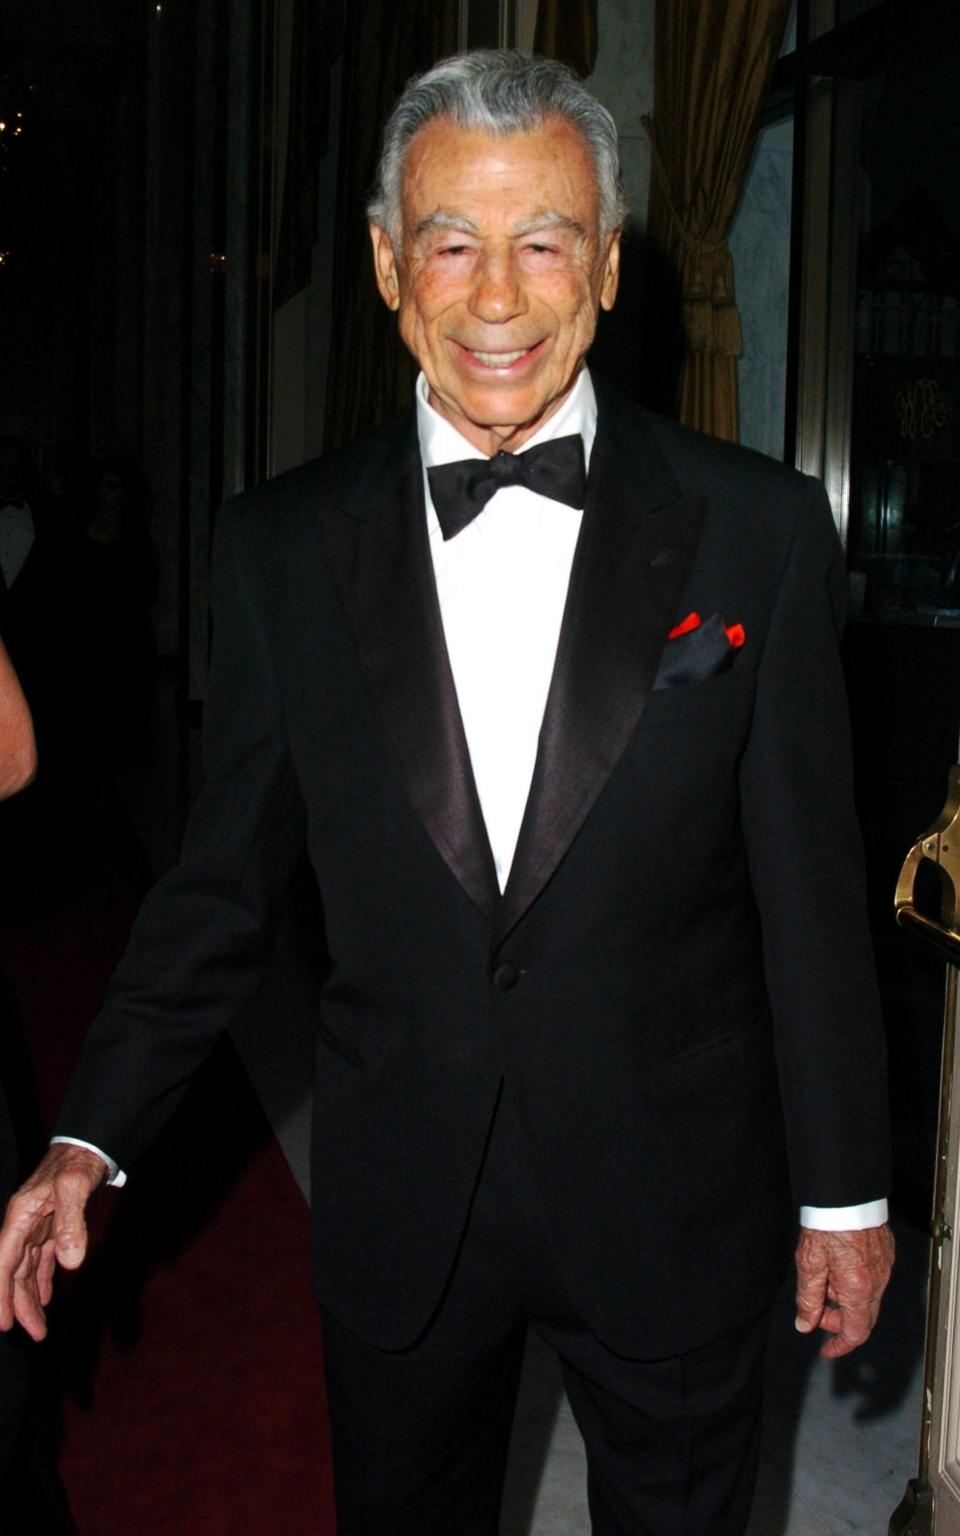 Kirk Kerkorian, who was sued by Bing for invasion of privacy following a paternity dispute; the two eventually settled out of court - John Sciulli/WireImage